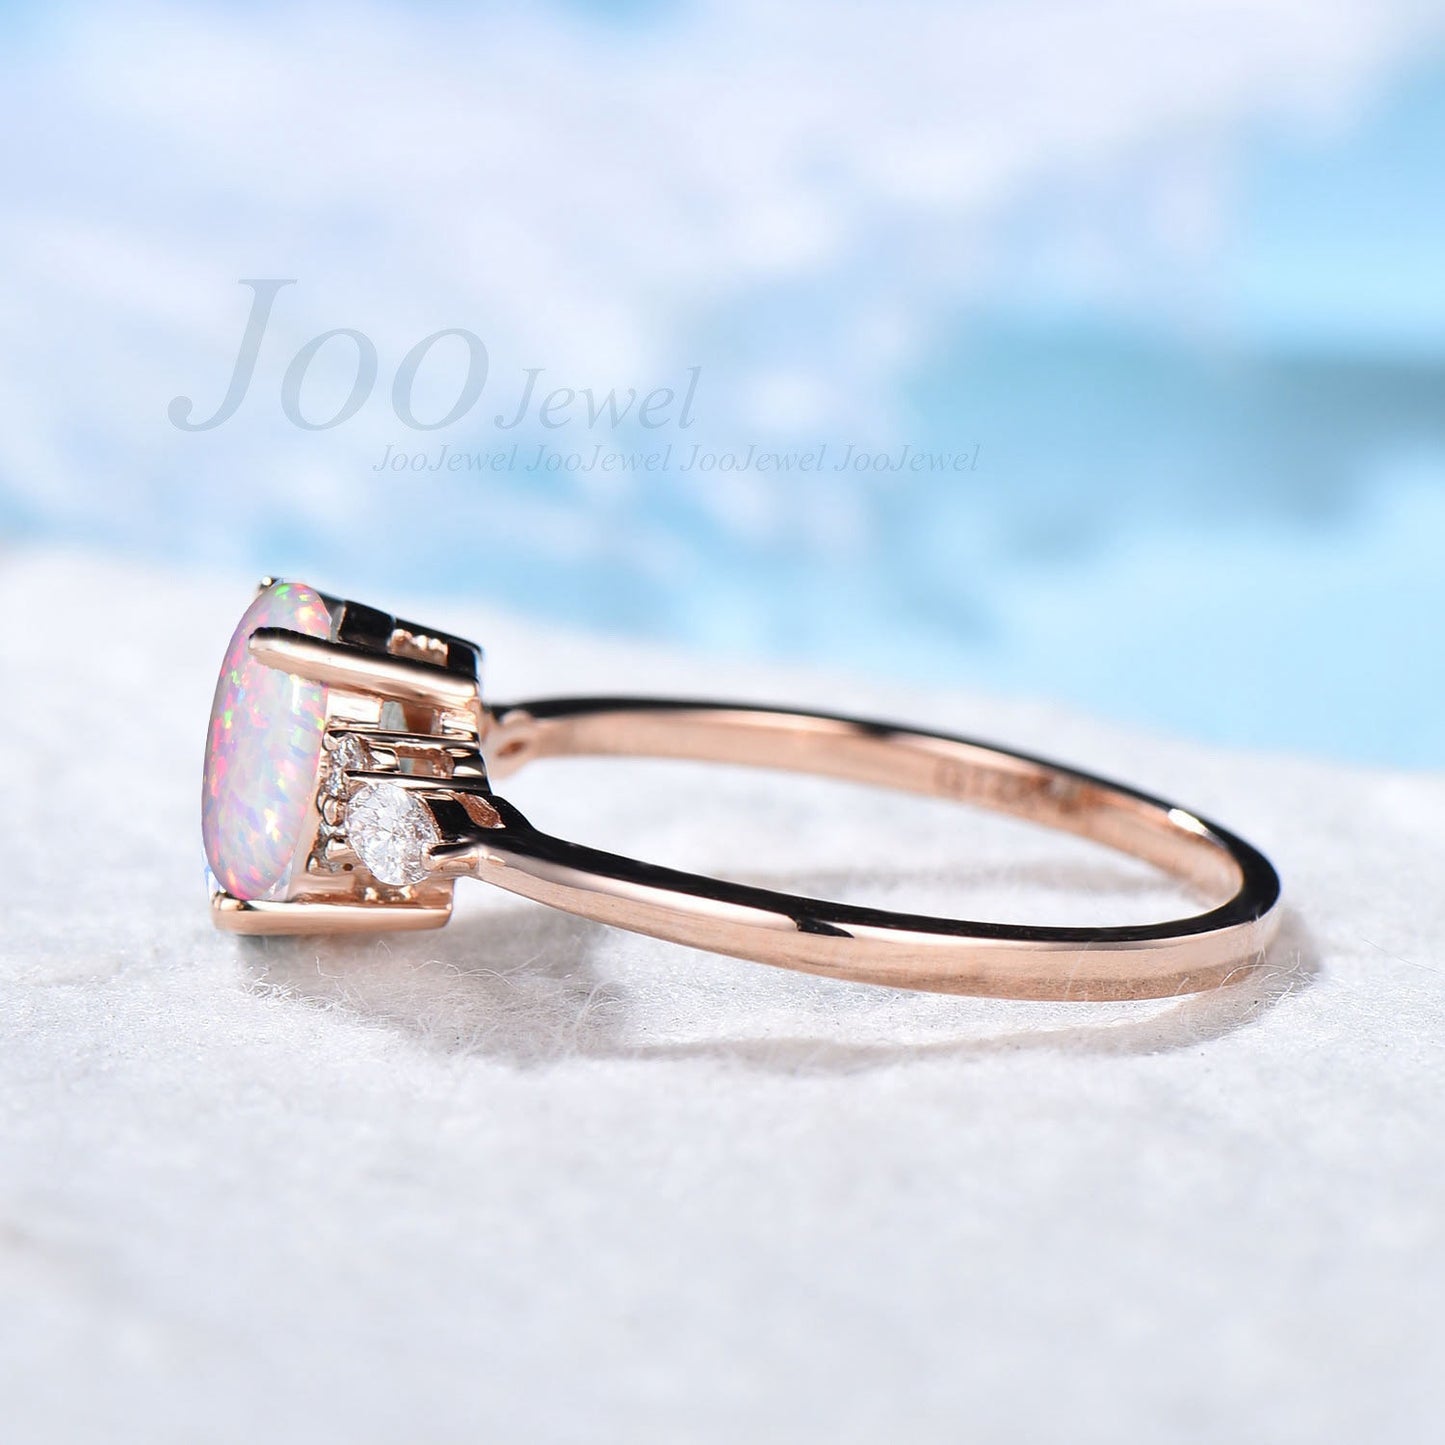 1.5ct Opal Engagement Ring Vintage Rose Gold Wedding Ring Sterling Silver Oval Opal Ring Unique October Birthstone Anniversary Birthday Gift